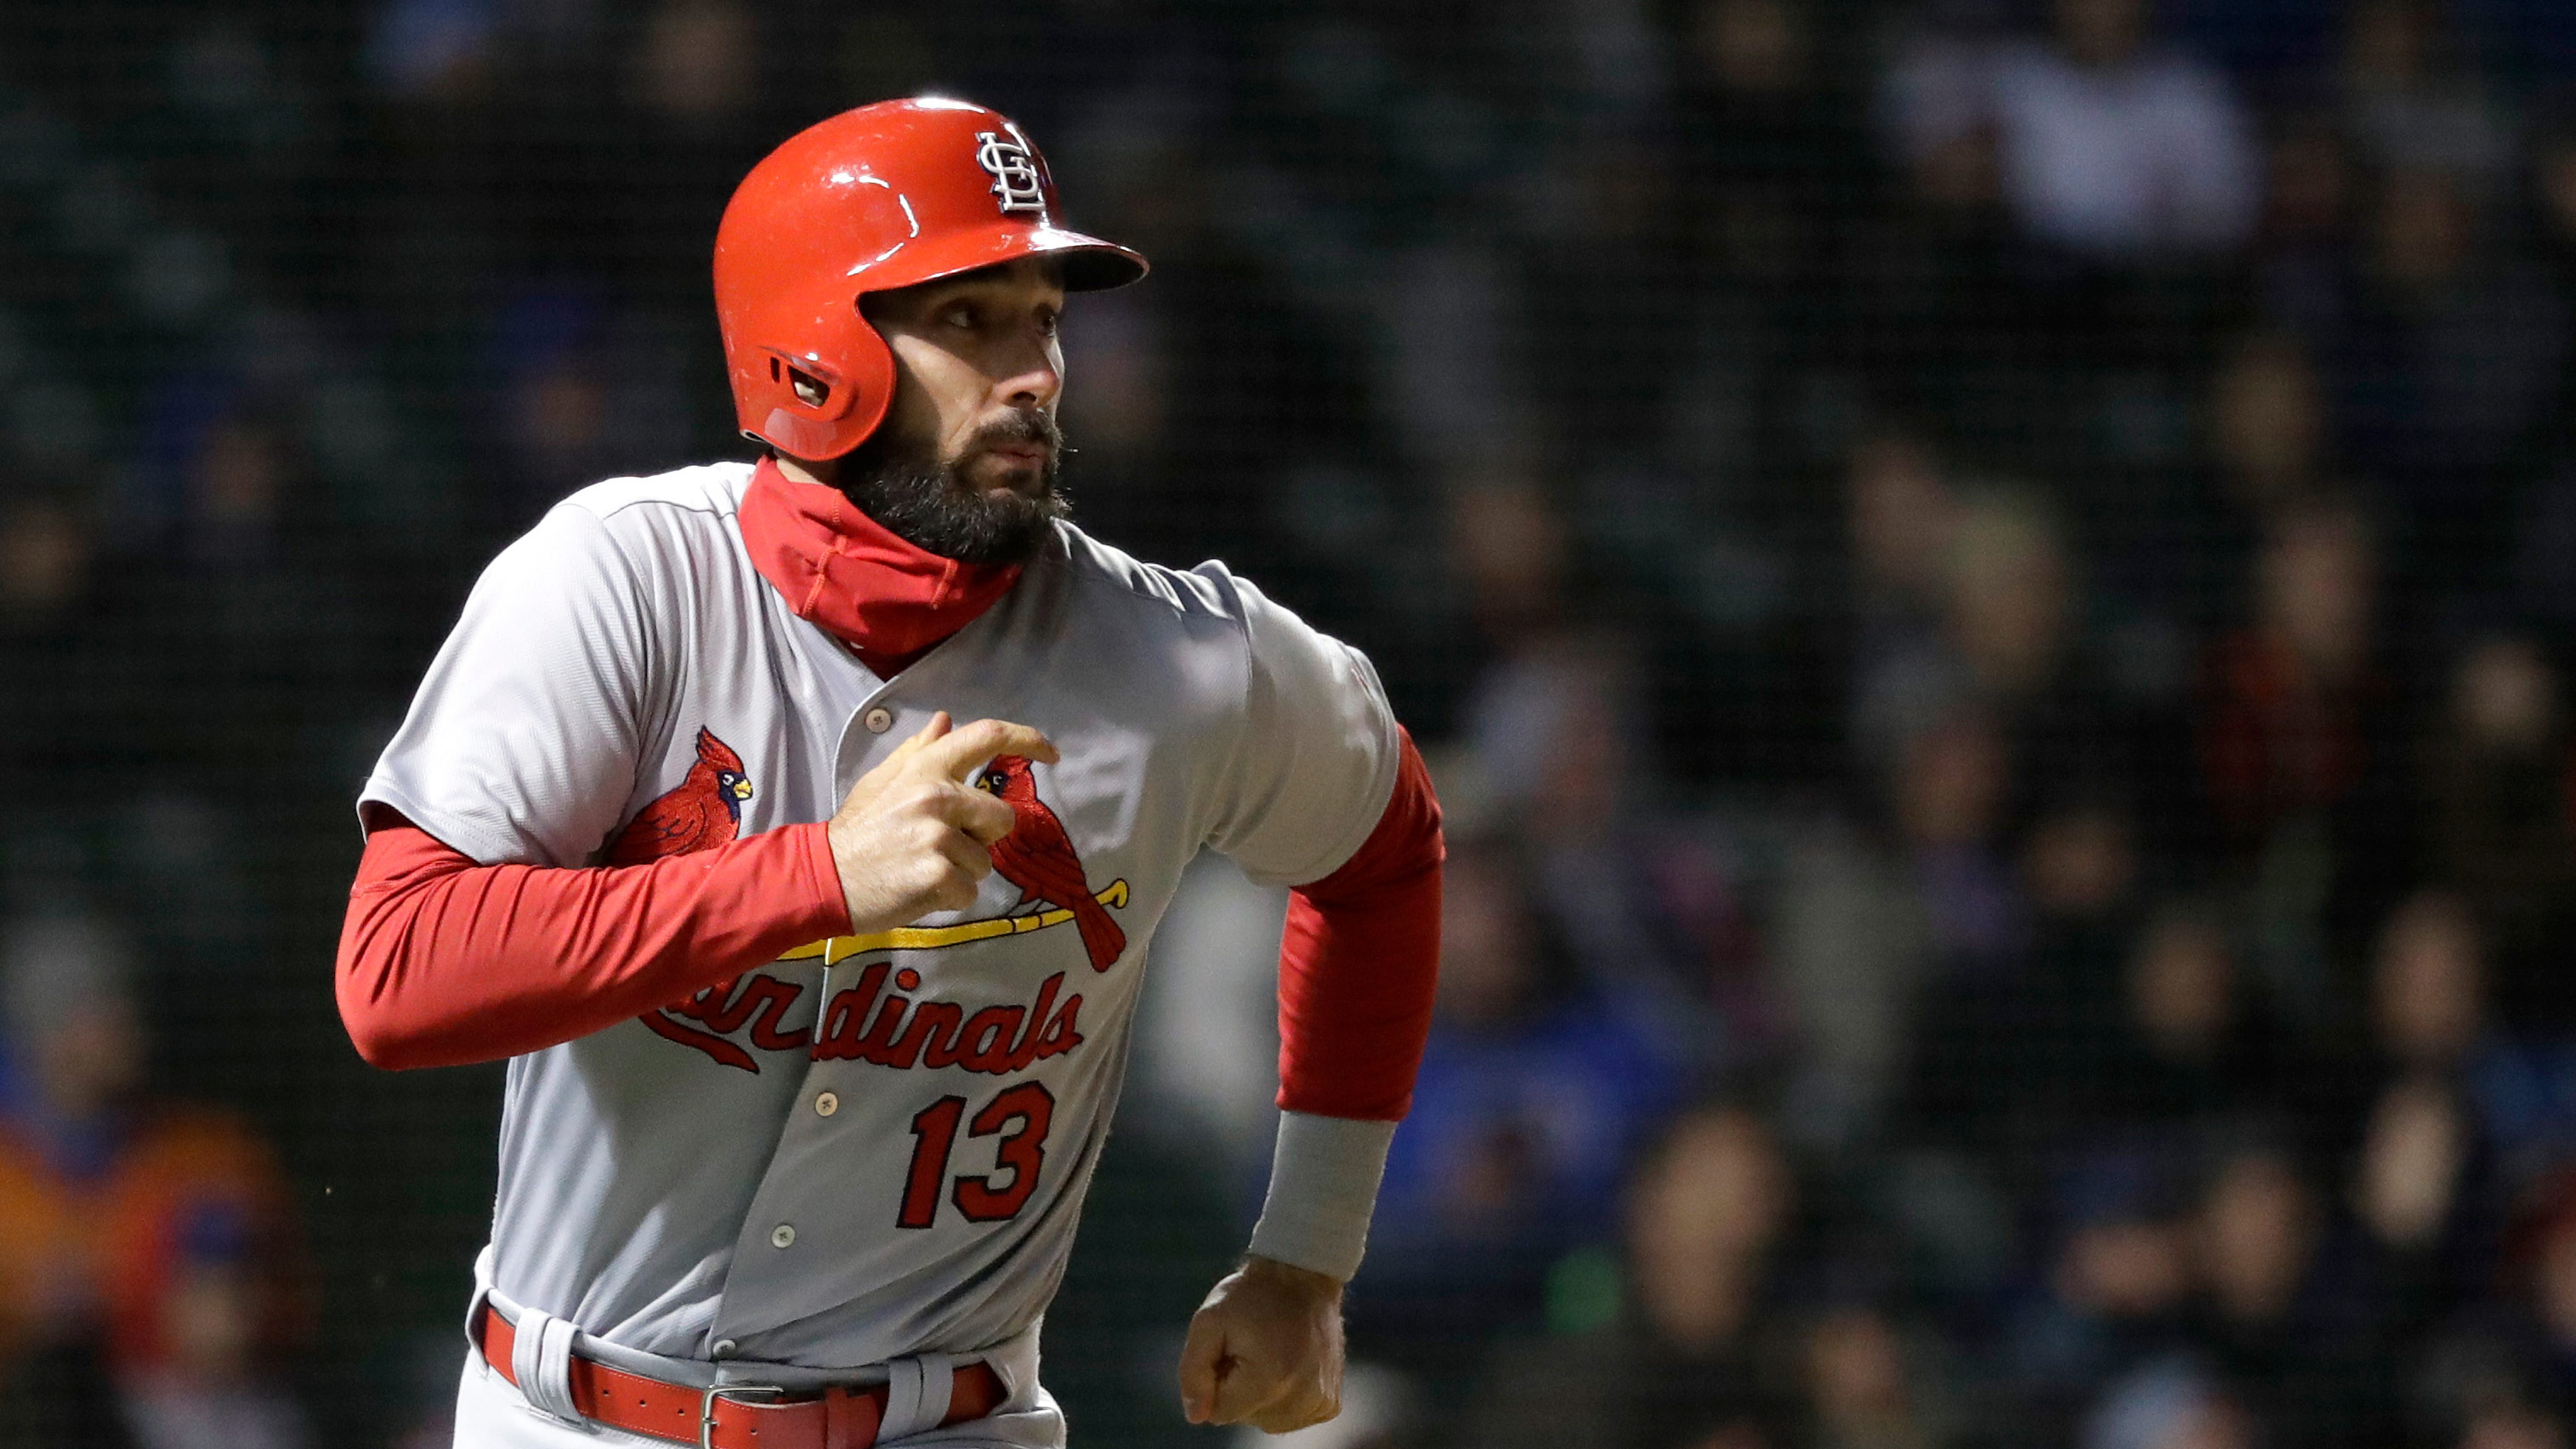 Carp drives in three as Cardinals top Cubs 5-3 on a cold night in Wrigley